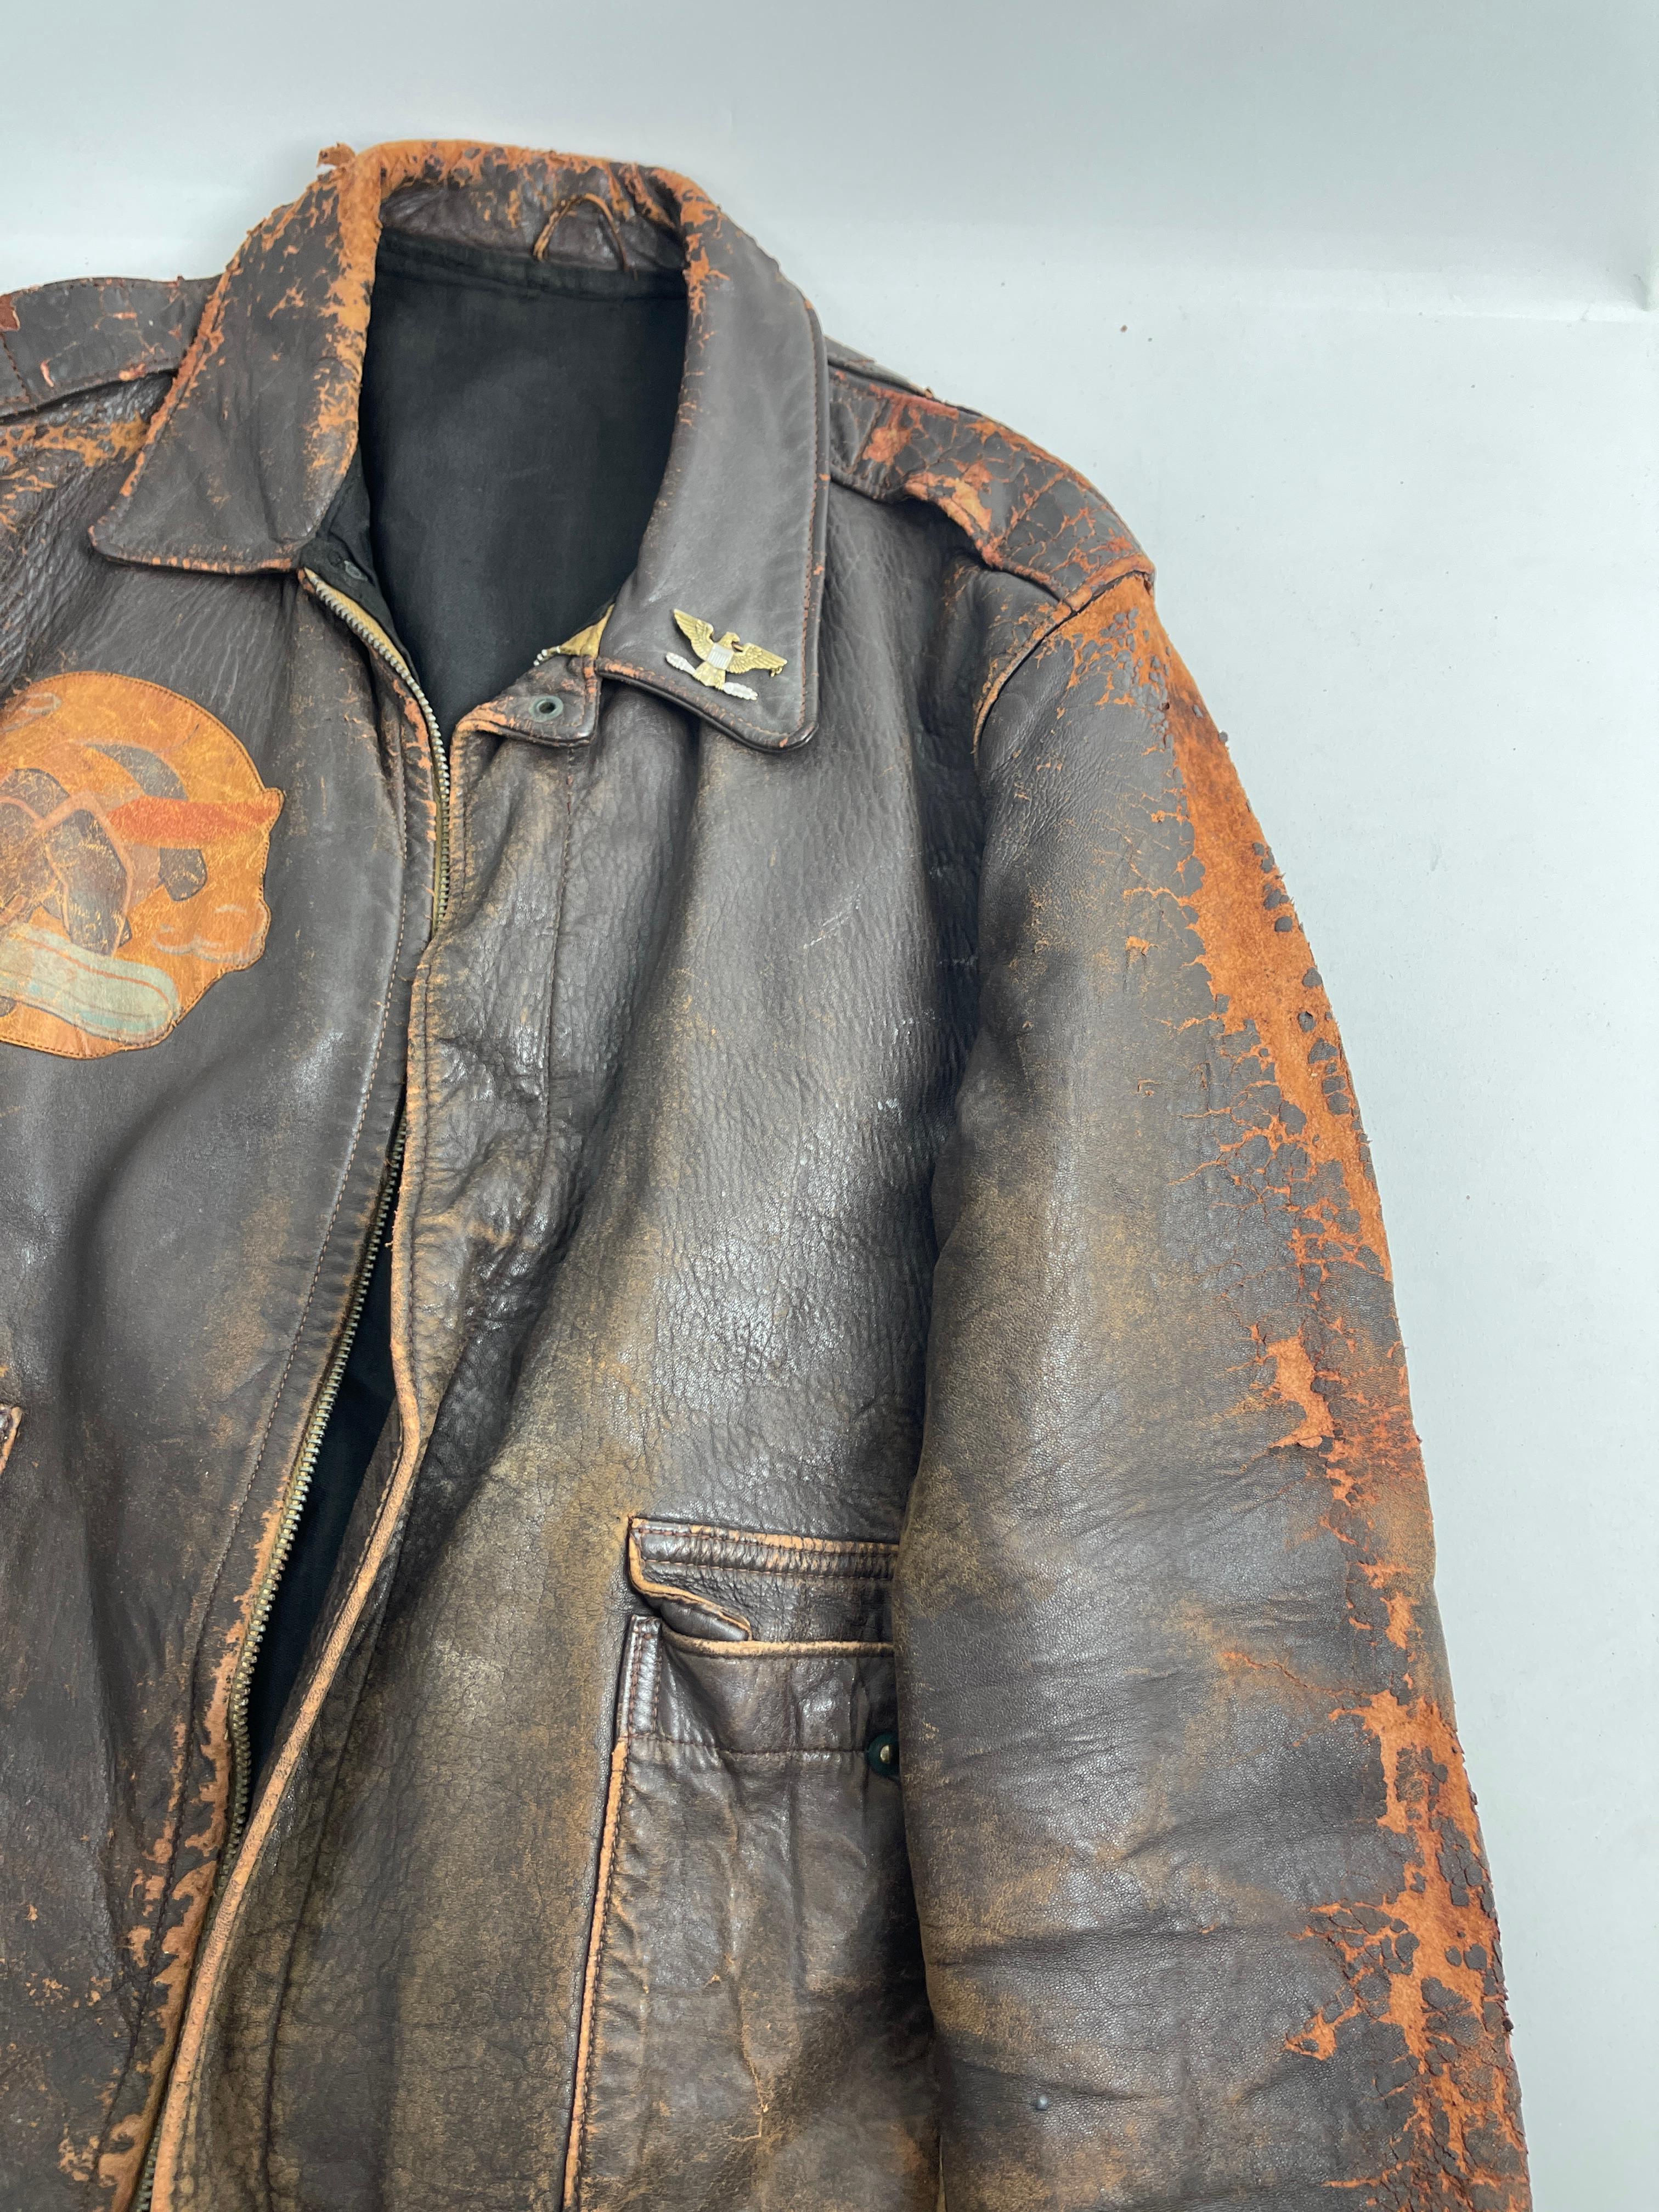 Vintage 1940s WW2 World War 2 American Painted Bomber jacket leather